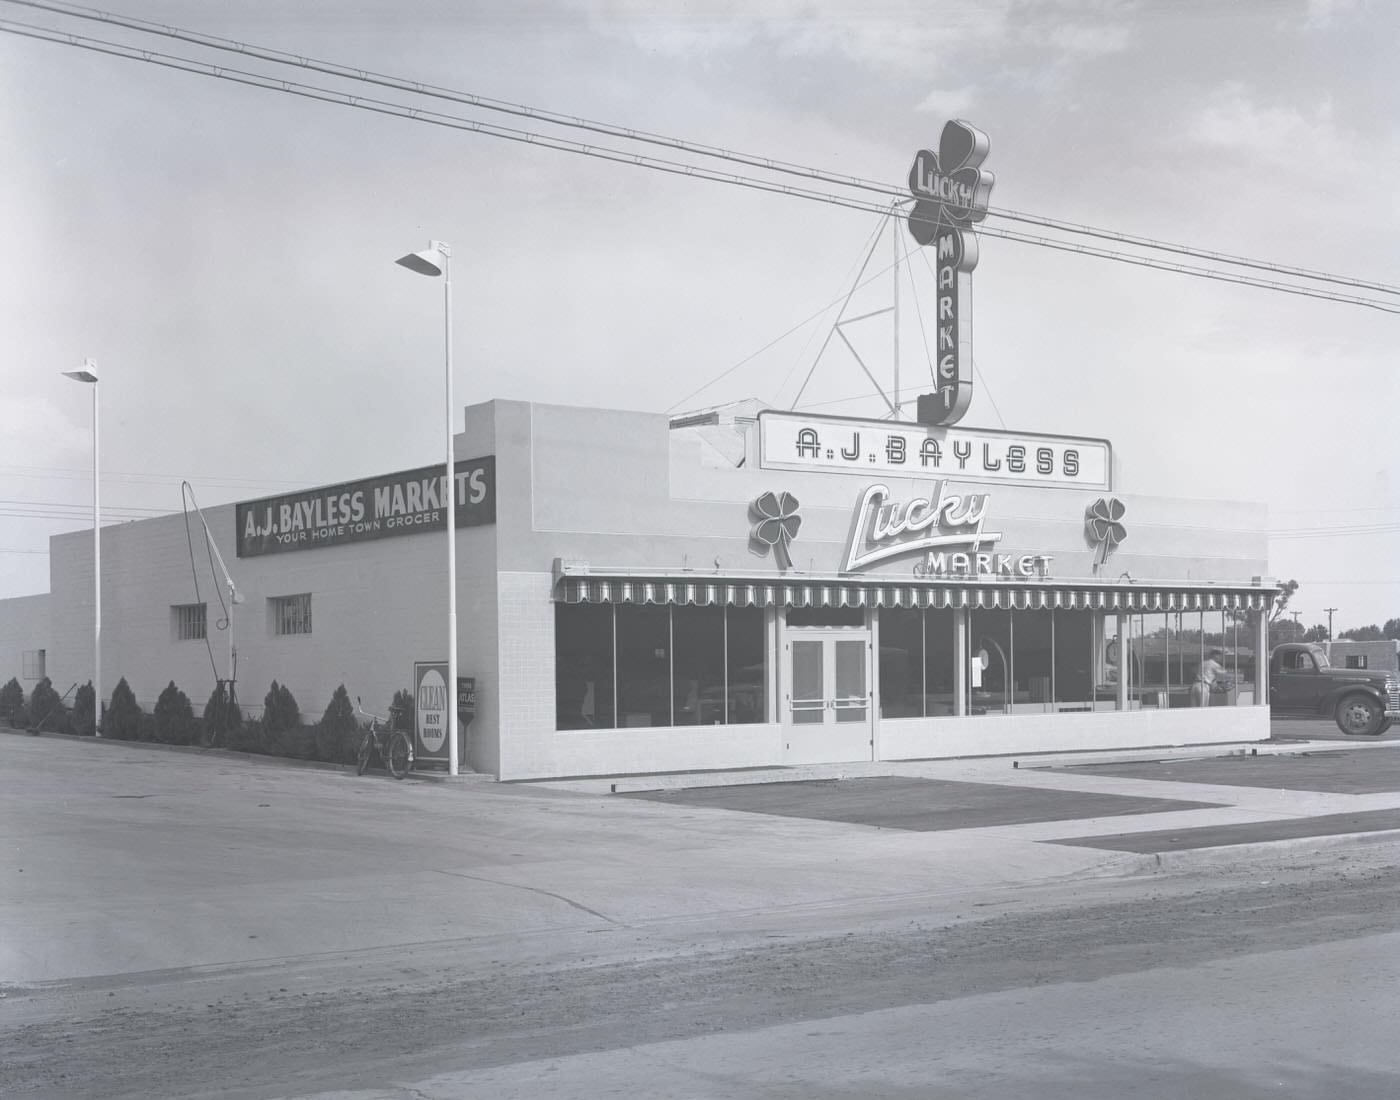 A. J. Bayless Co. Store Exterior, 1941